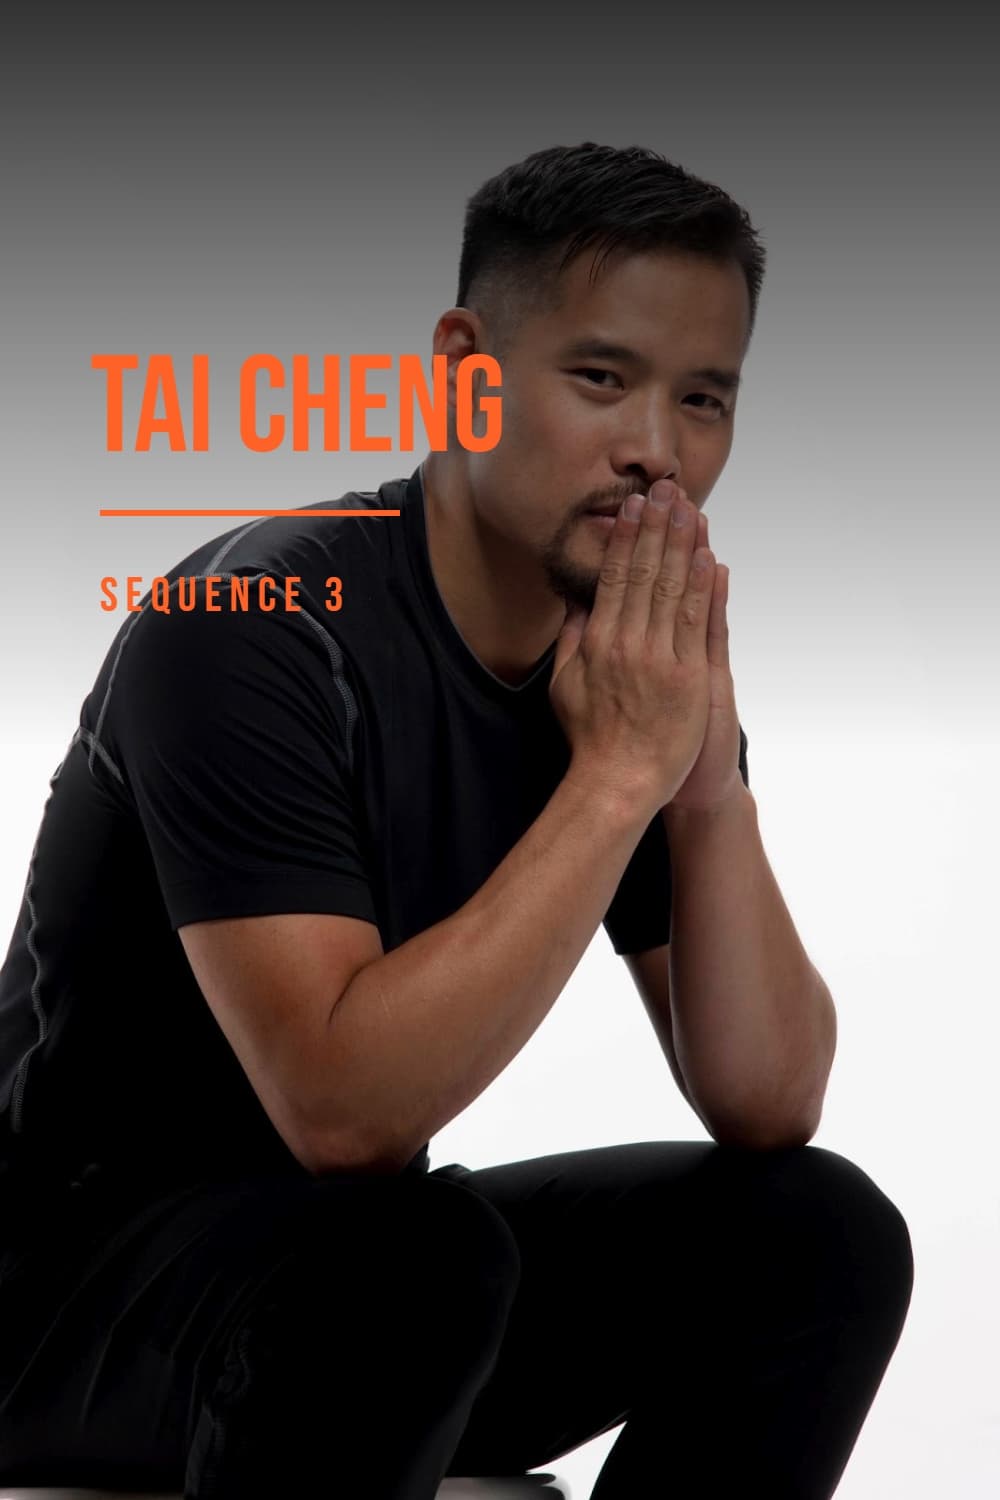 Tai Cheng - Sequence 3